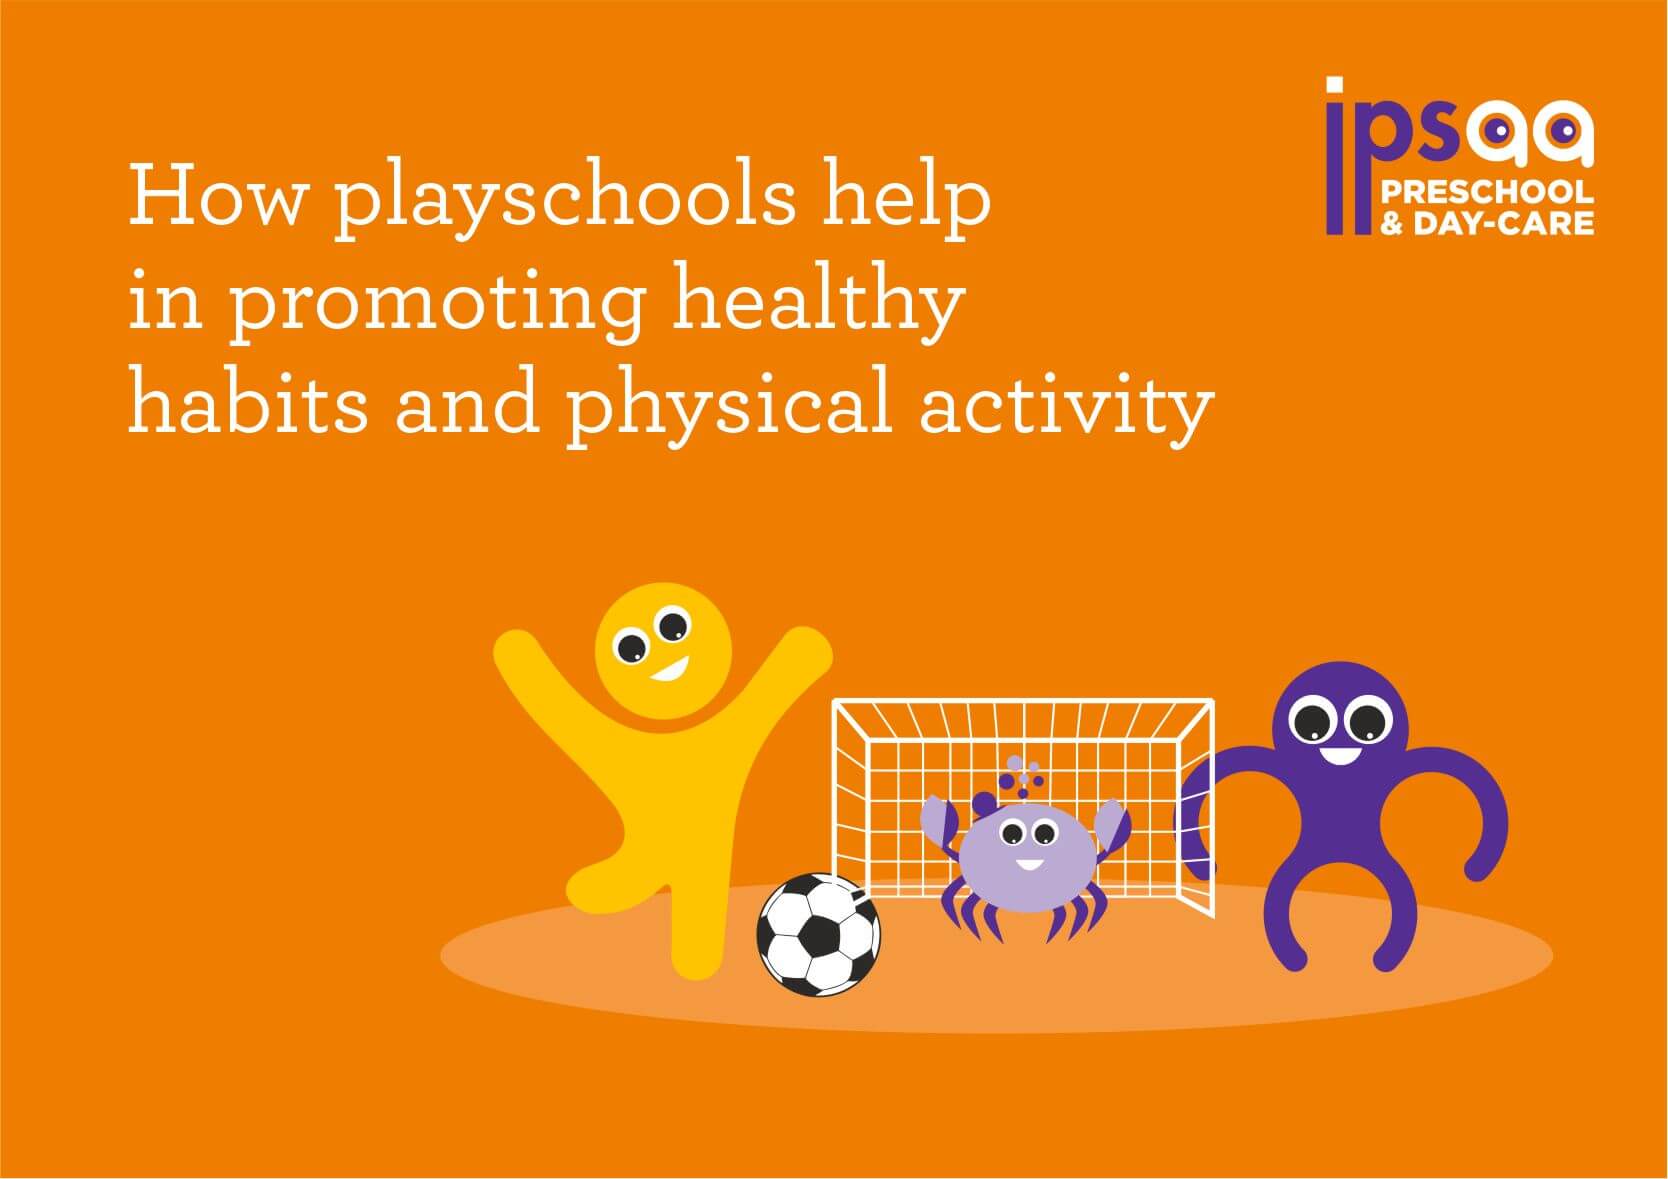 Promoting healthy habits and physical activity in children